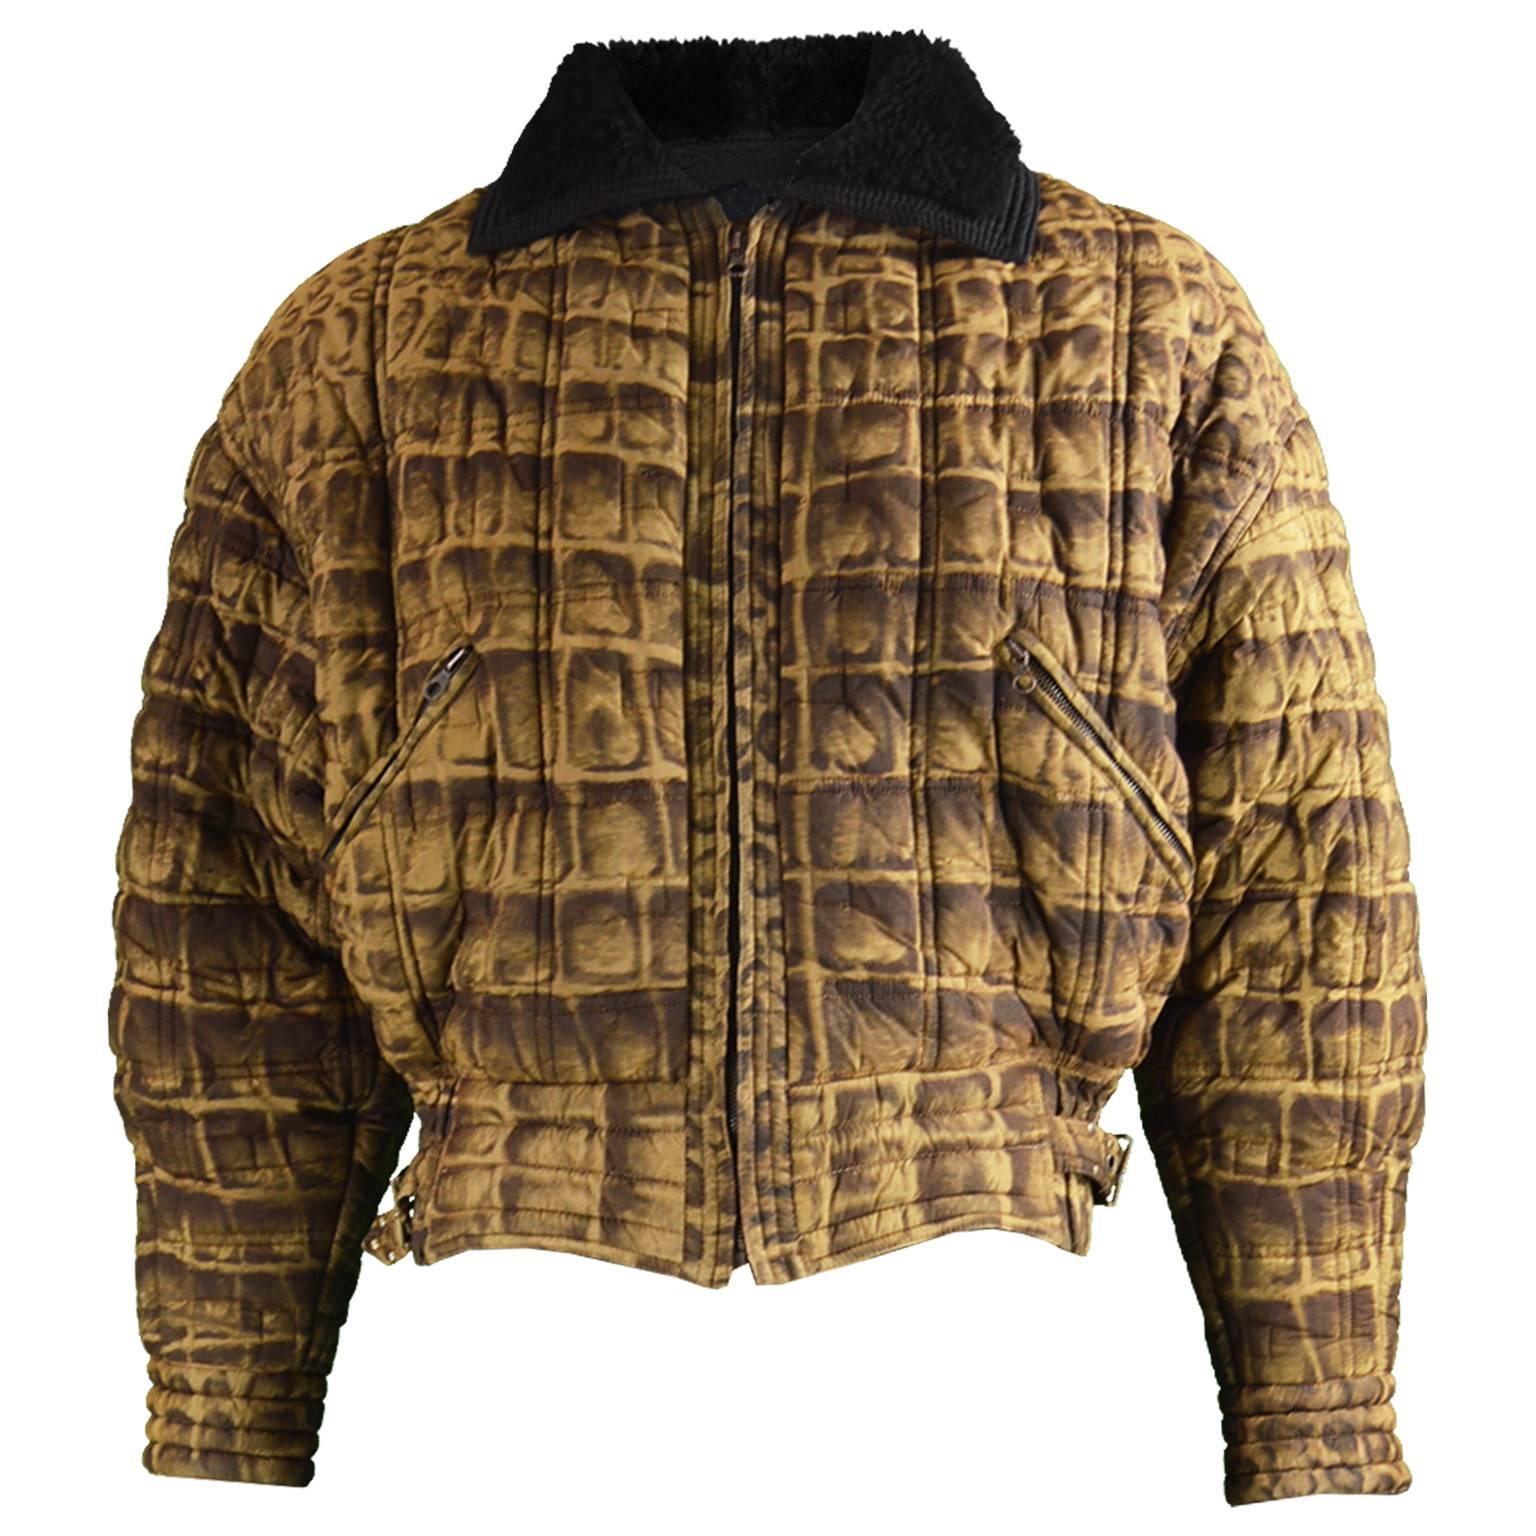 Gianni Versace Men's Quilted Puffer Coat with Shearling Collar, c. 1992 For Sale